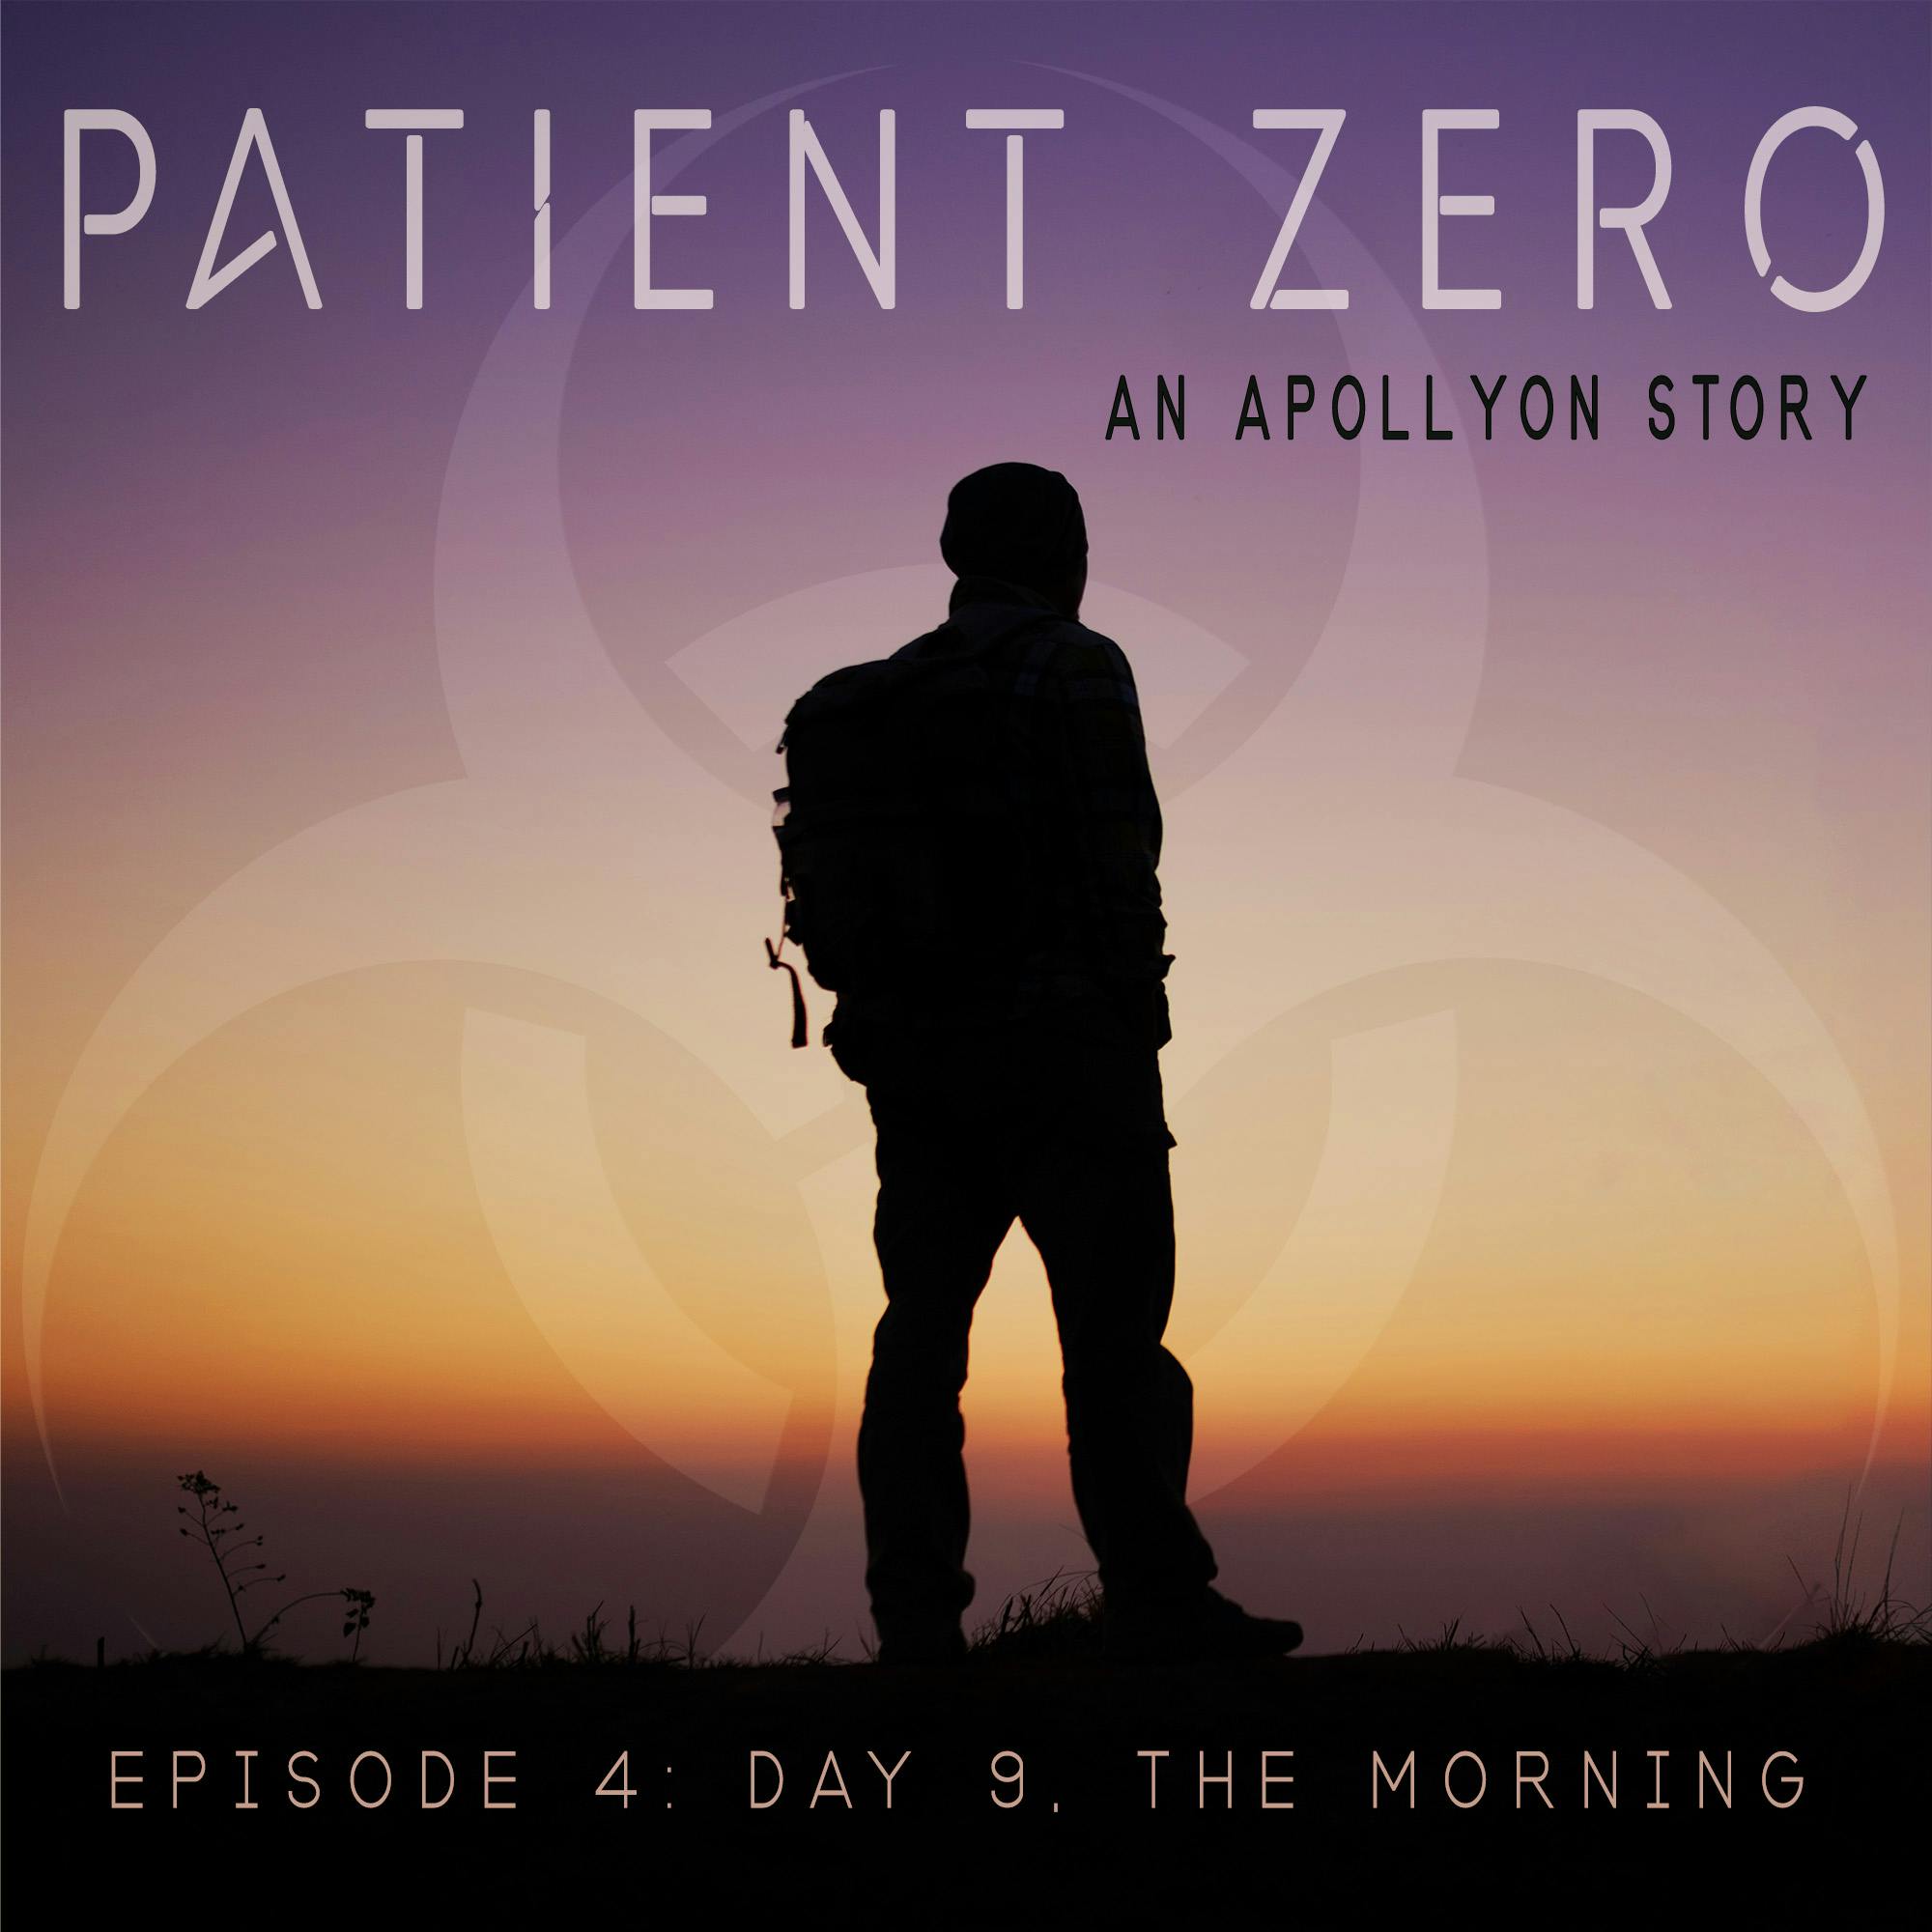 Patient Zero, Episode 4: Day 9, The Morning